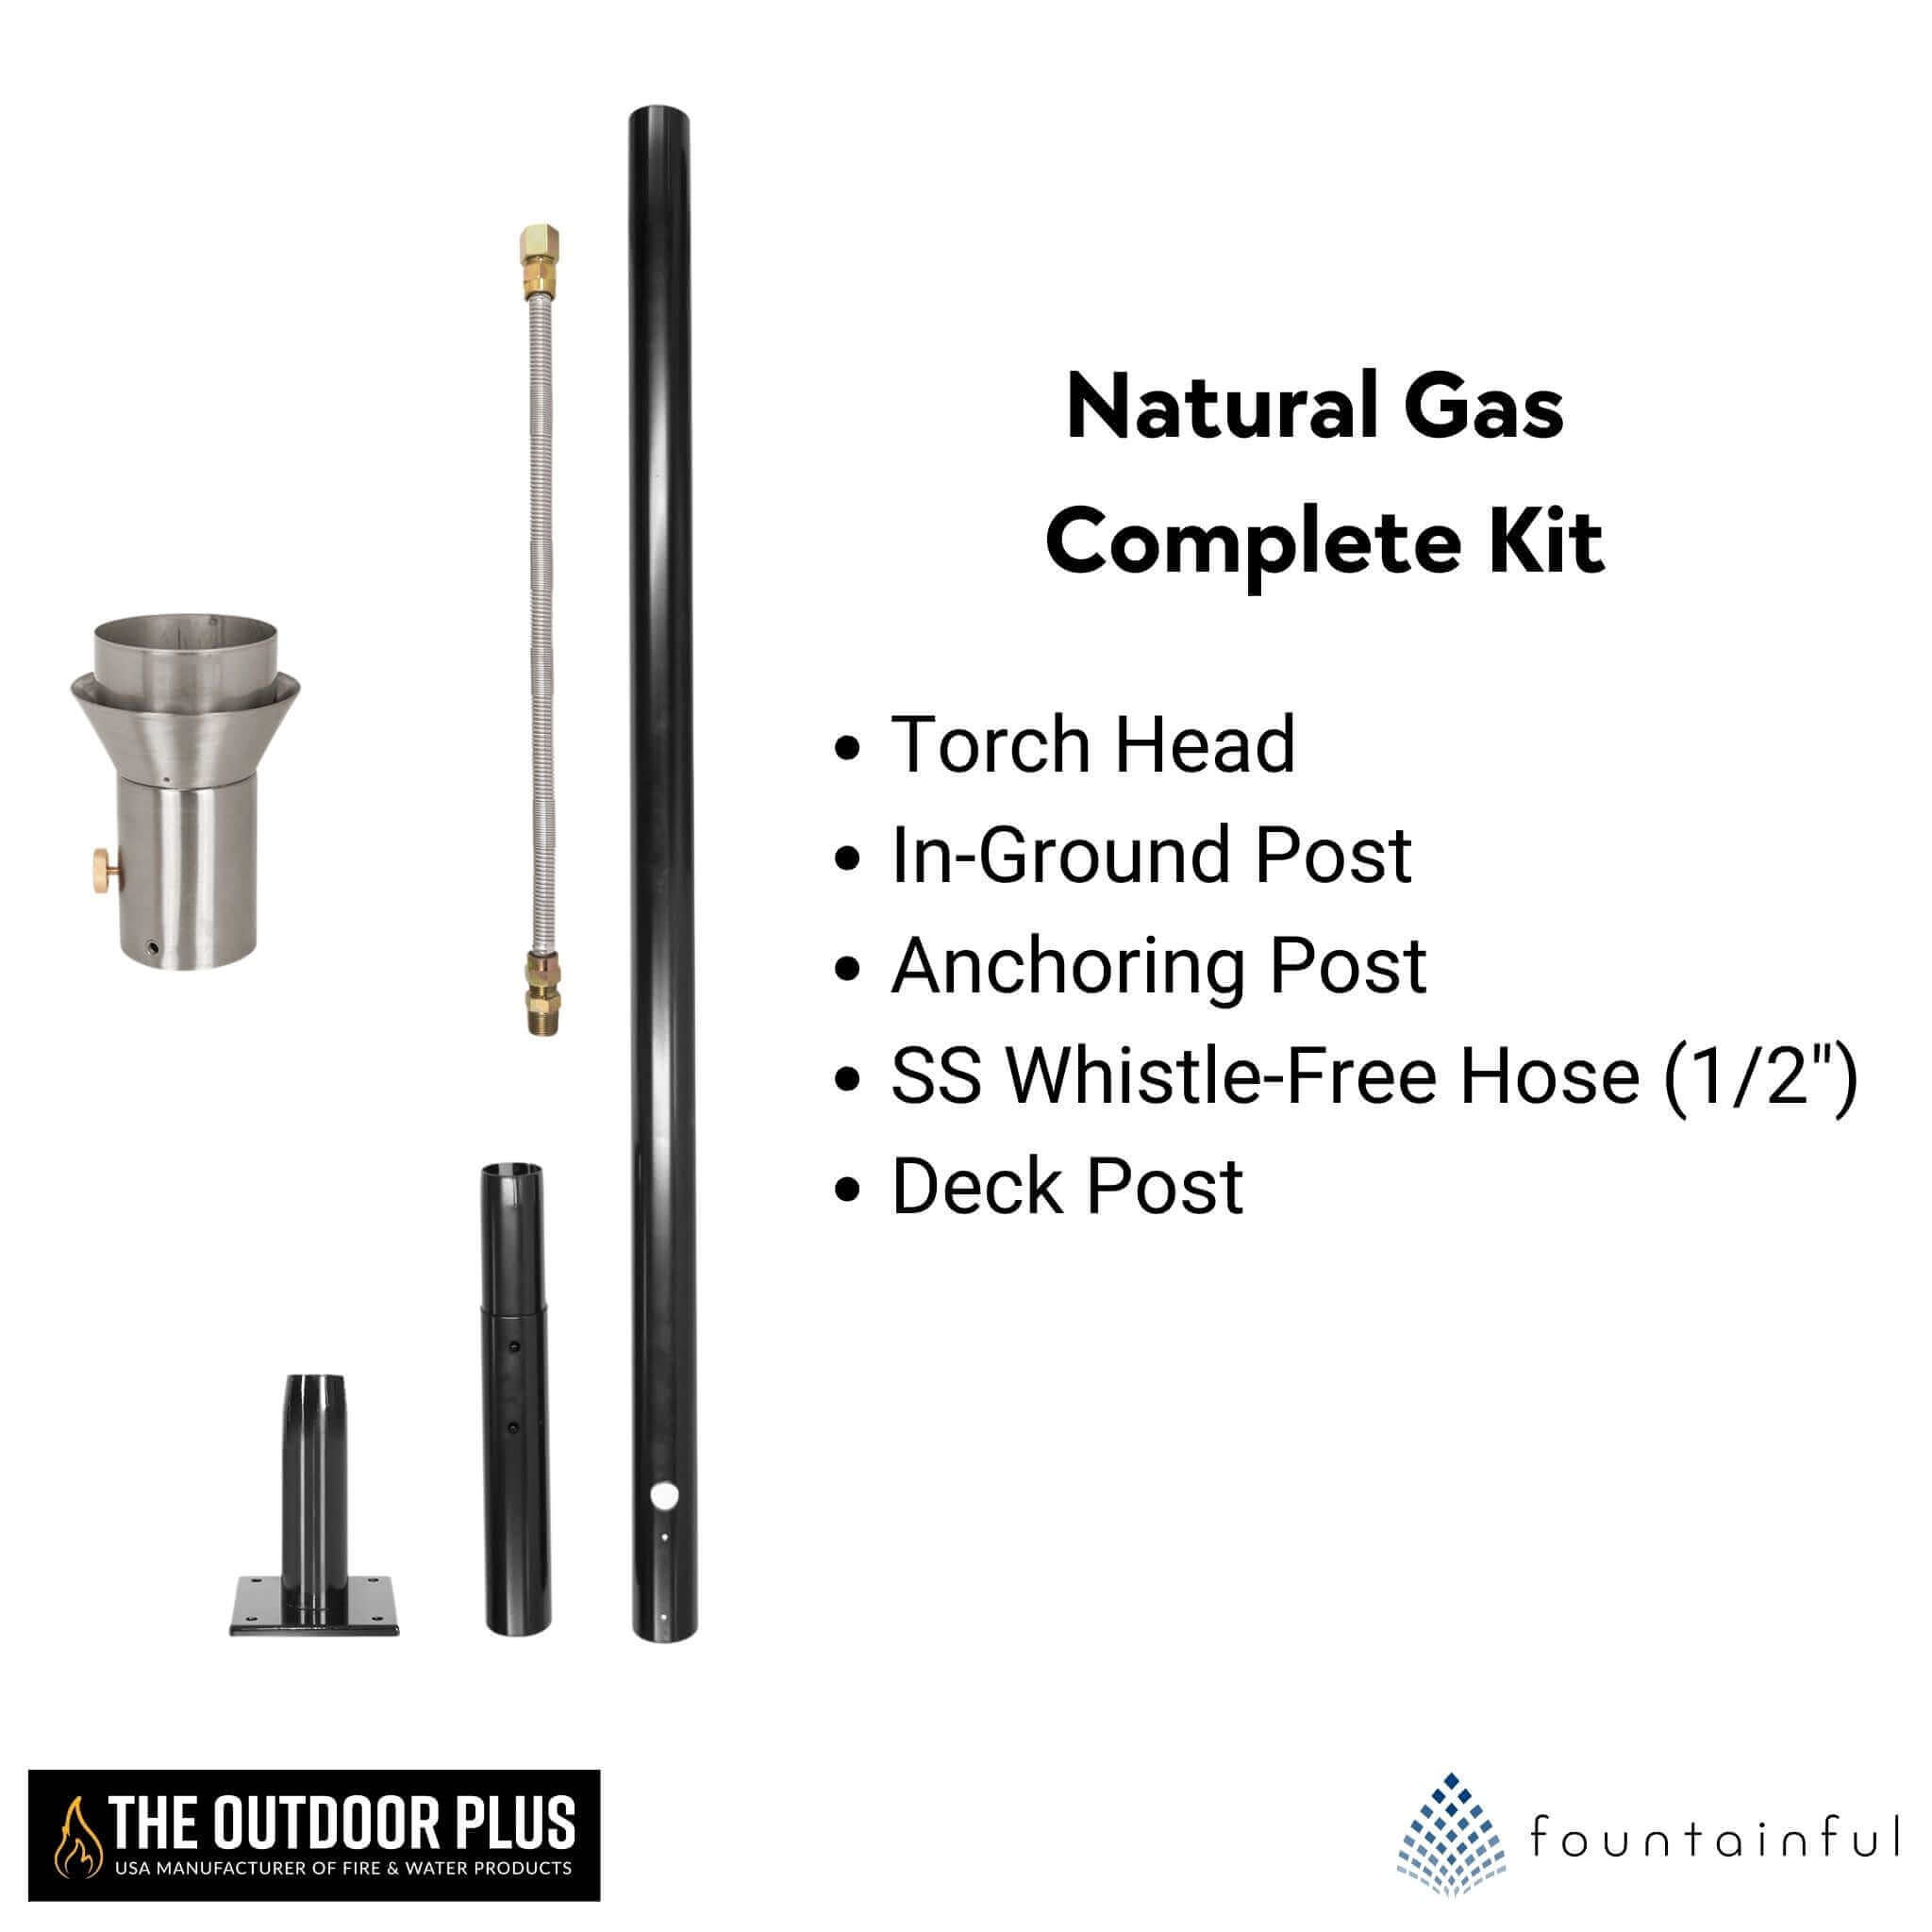 Urn Fire Torch COMPLETE KIT - Stainless Steel - The Outdoor Plus